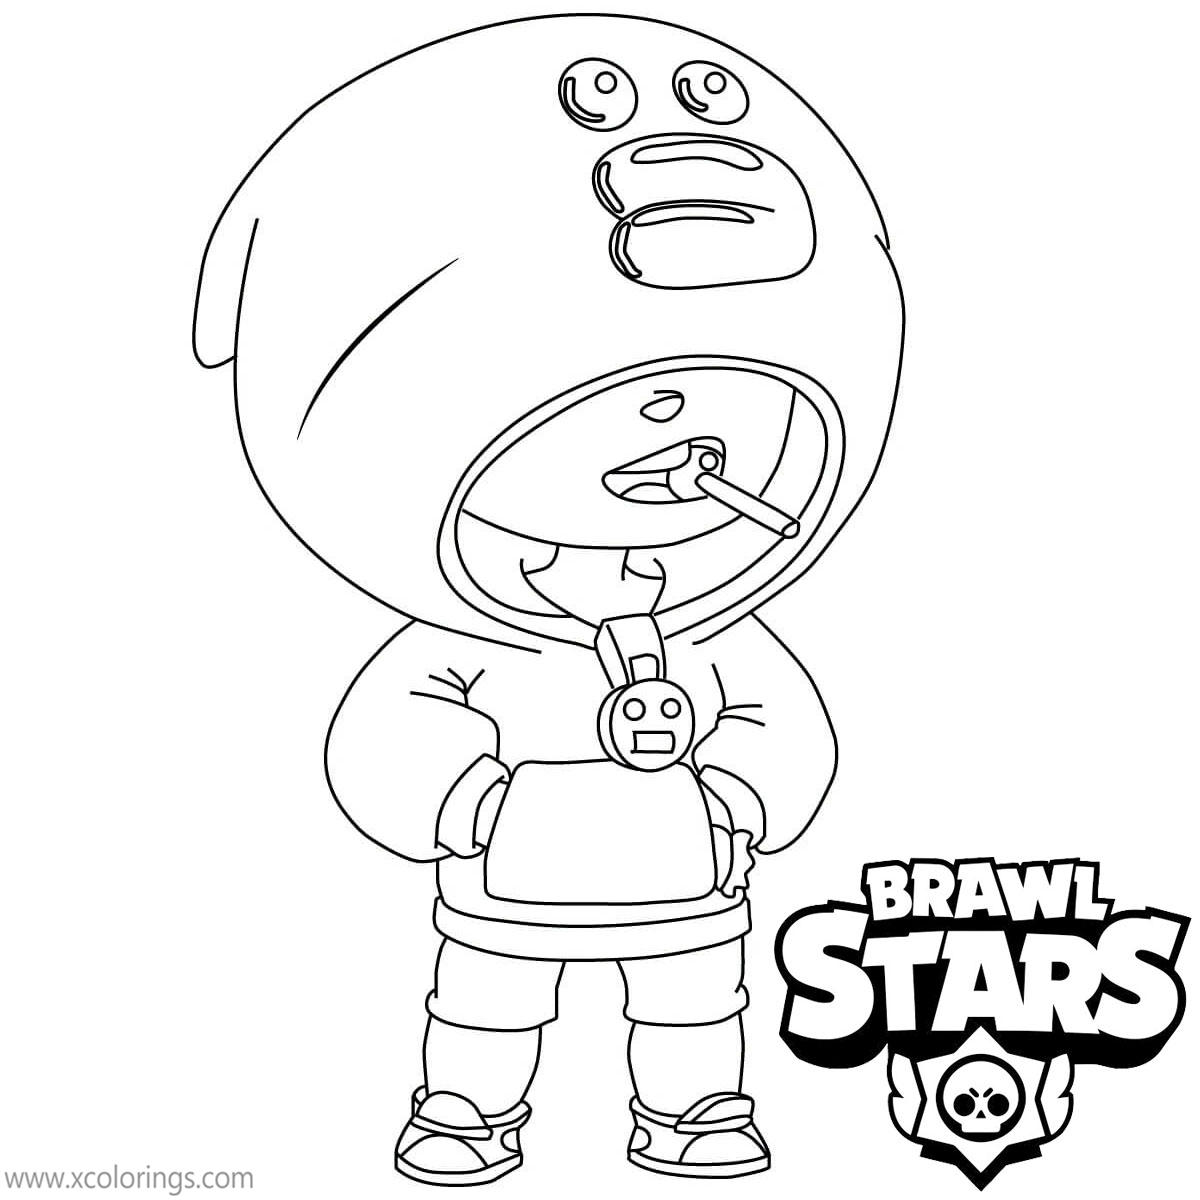 Free Leon Brawl Stars Coloring Pages Black and White printable